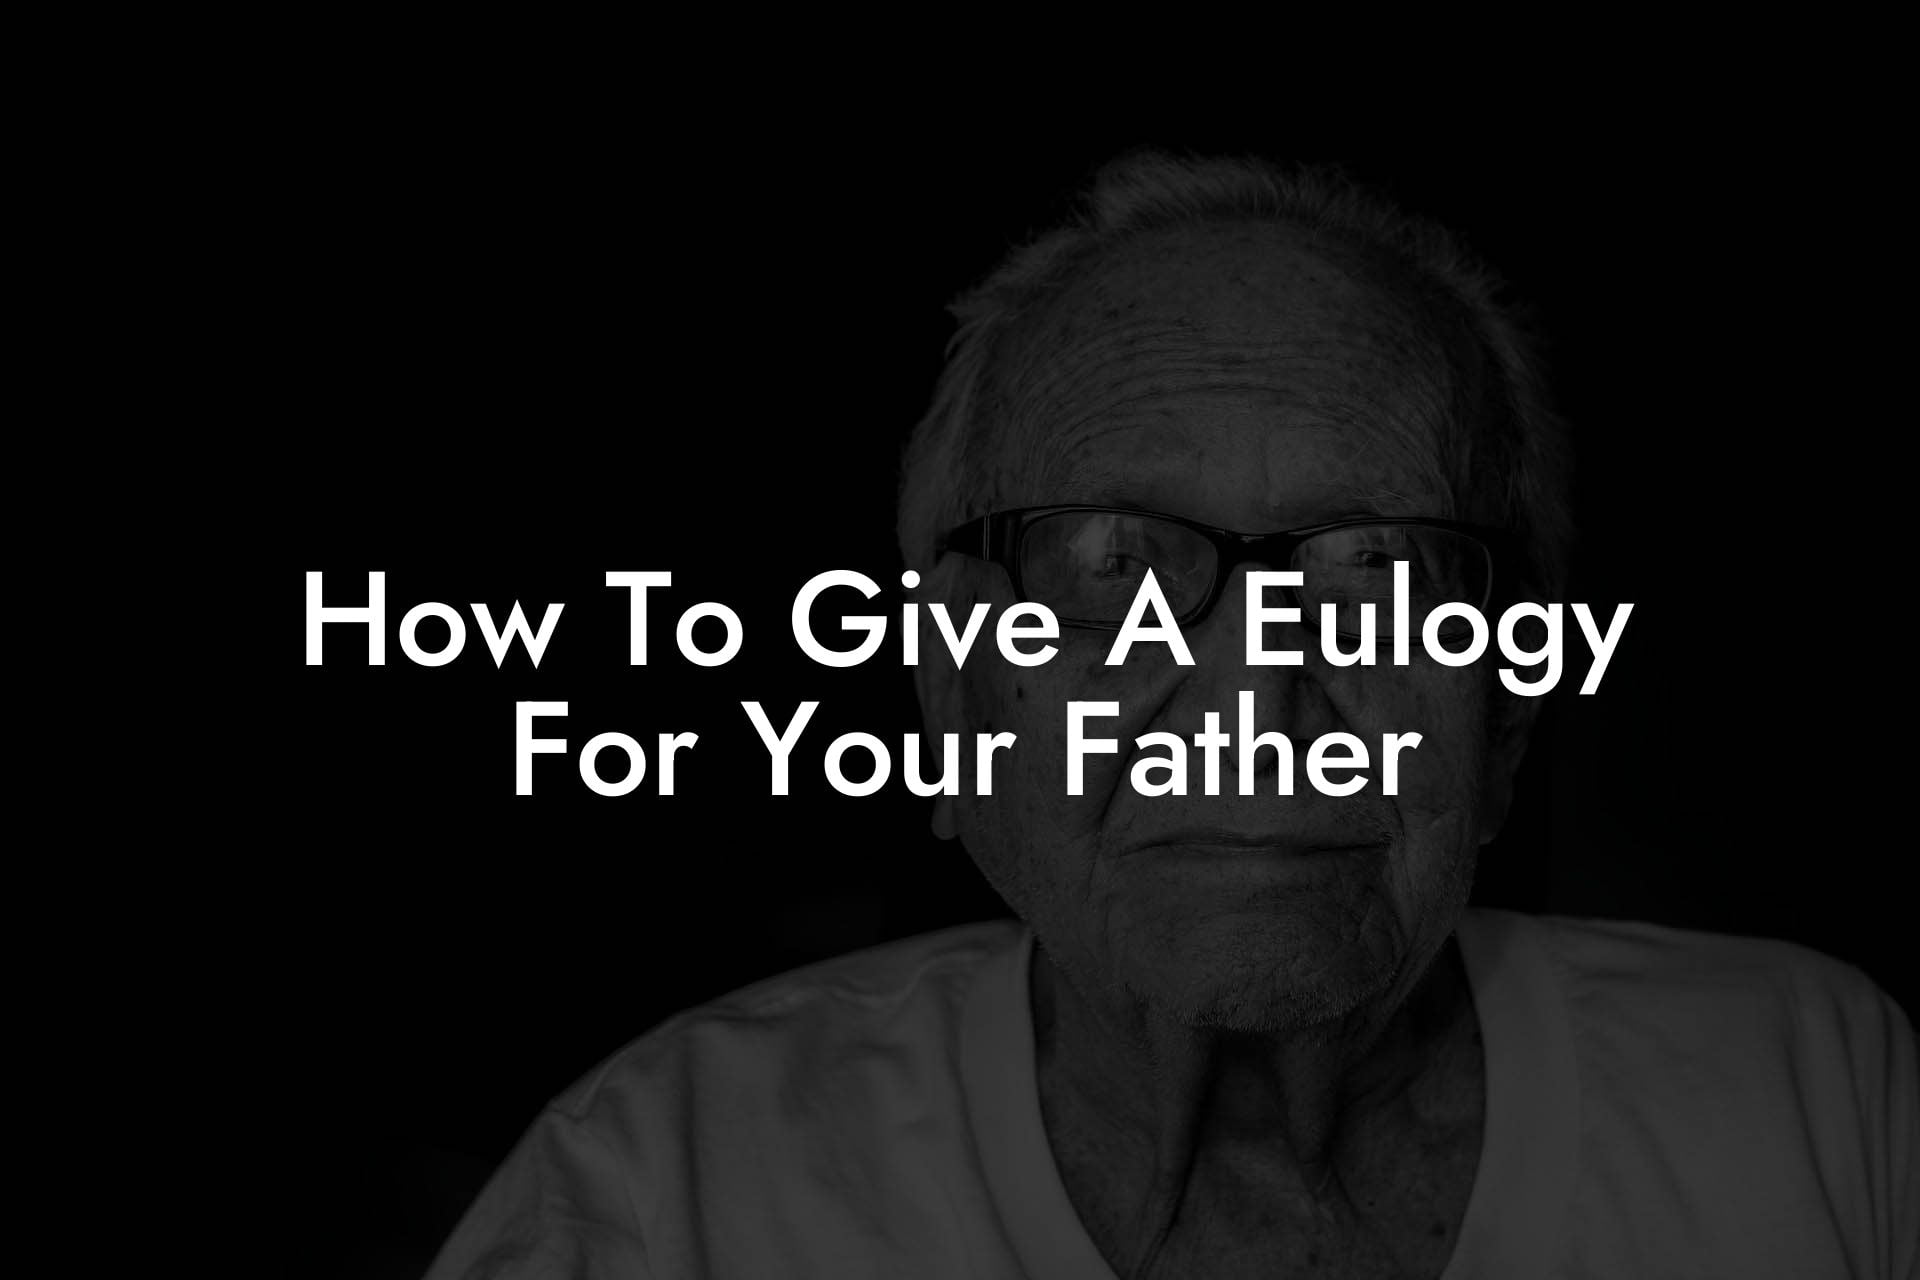 How To Give A Eulogy For Your Father